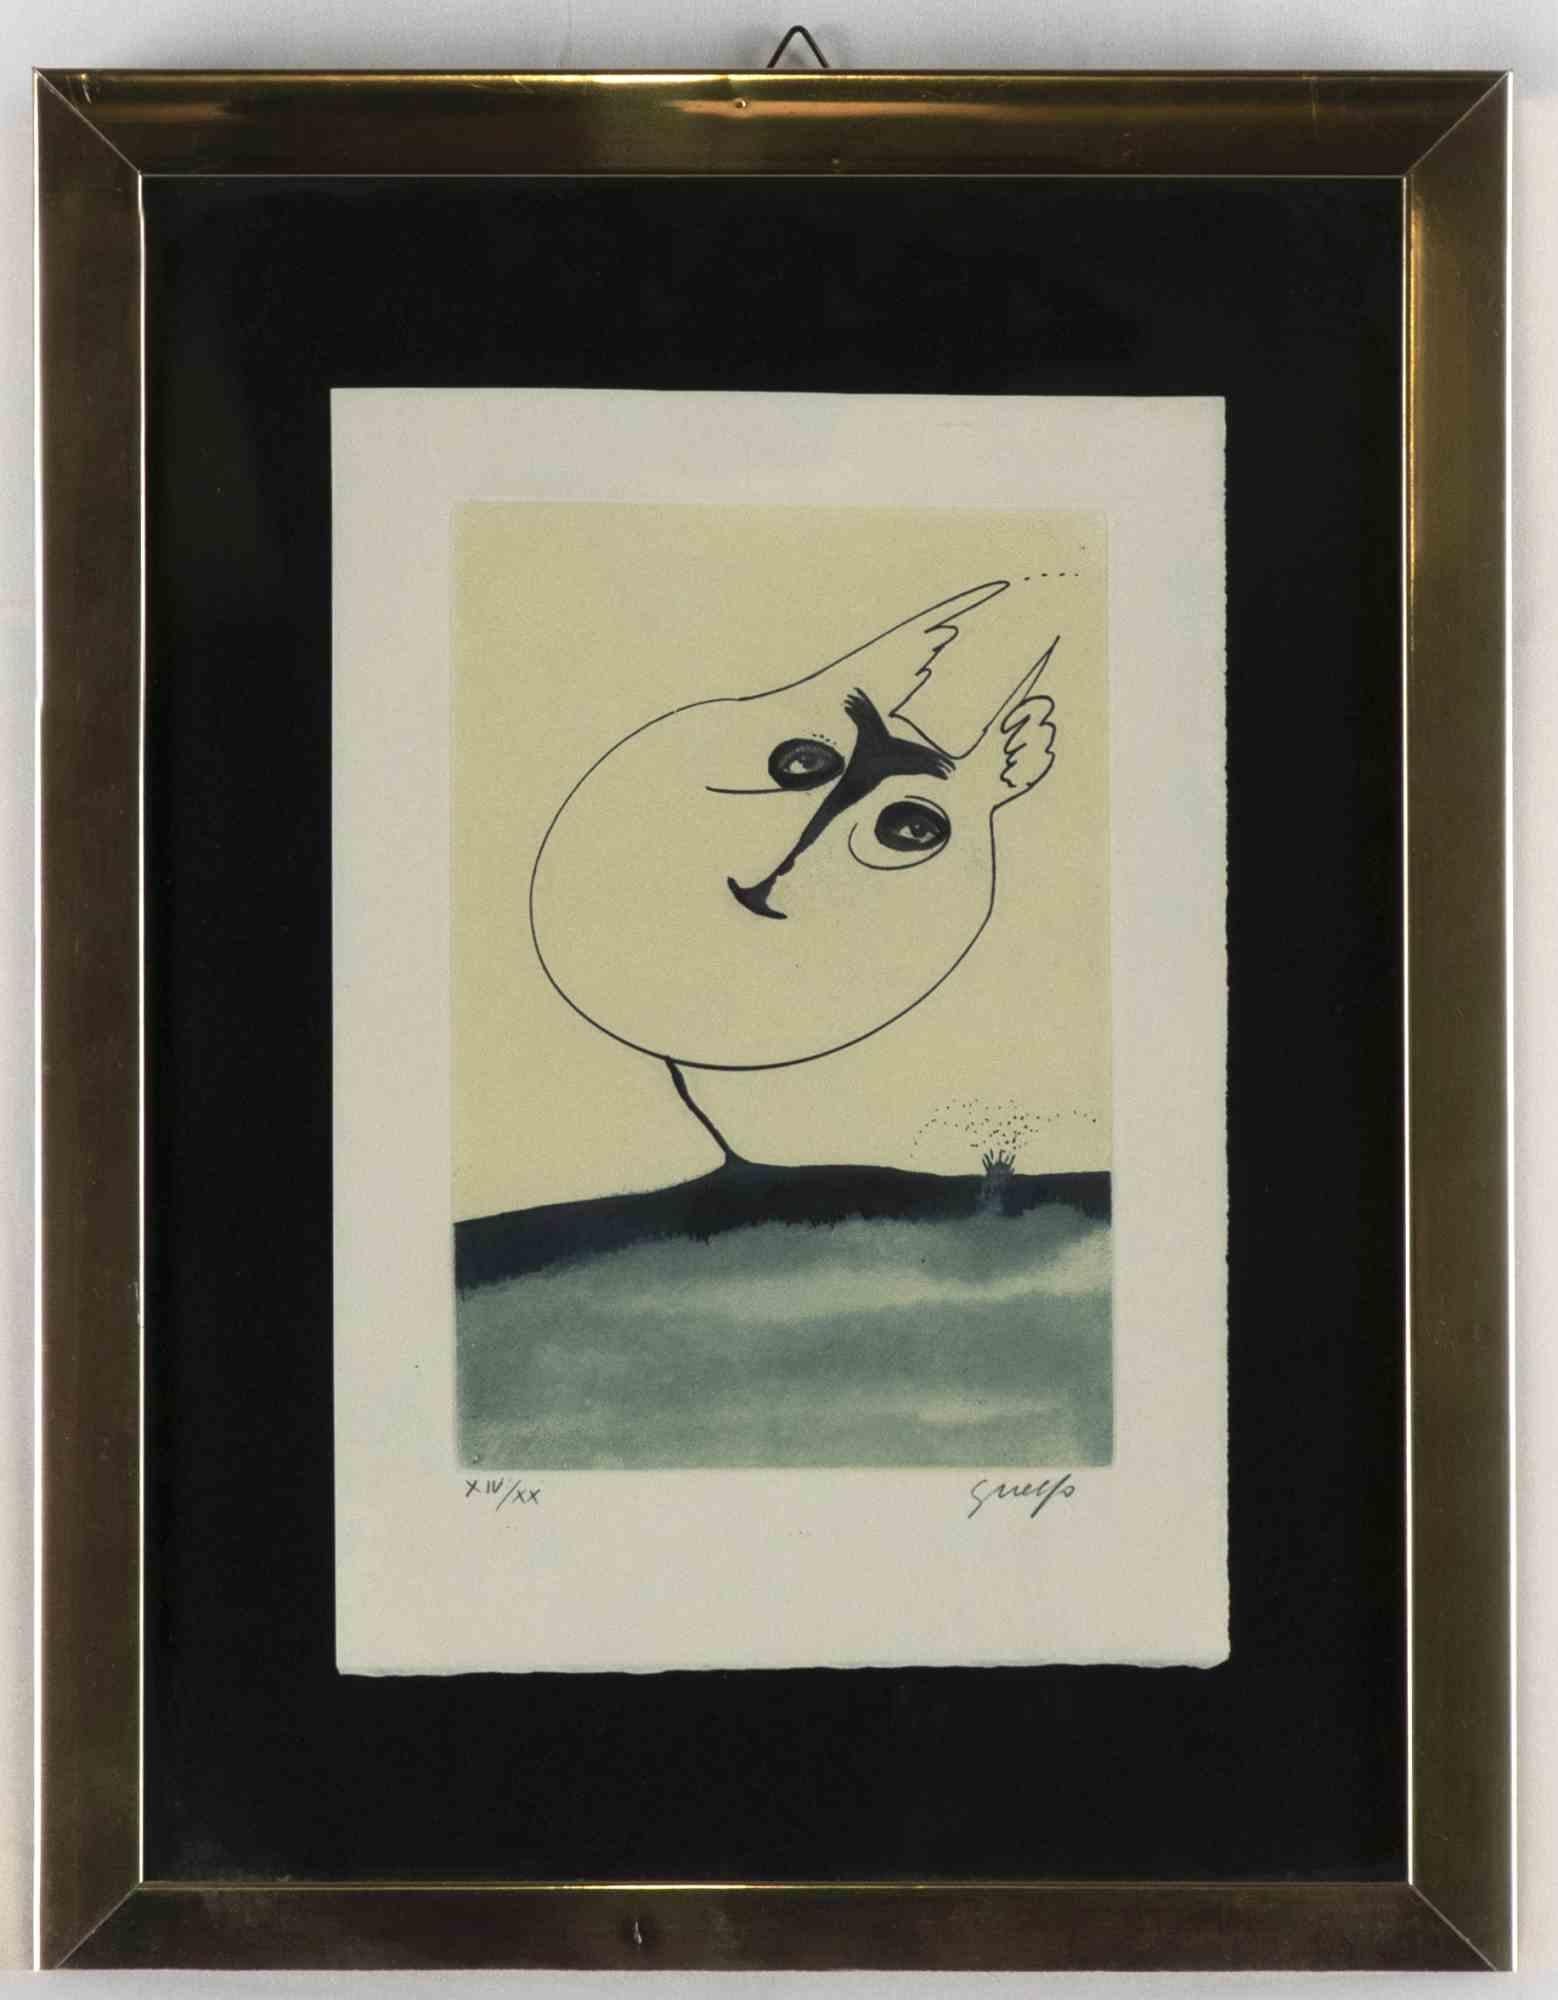 The Angel is an original modern Artwork realized in Italy by Guelfo Bianchini (Ancona, 1937) in 1970s.

Original colored etching on paper. 

Hand-signed lower right corner. Limited edition series, numbered on the lower-left corner in pencil: